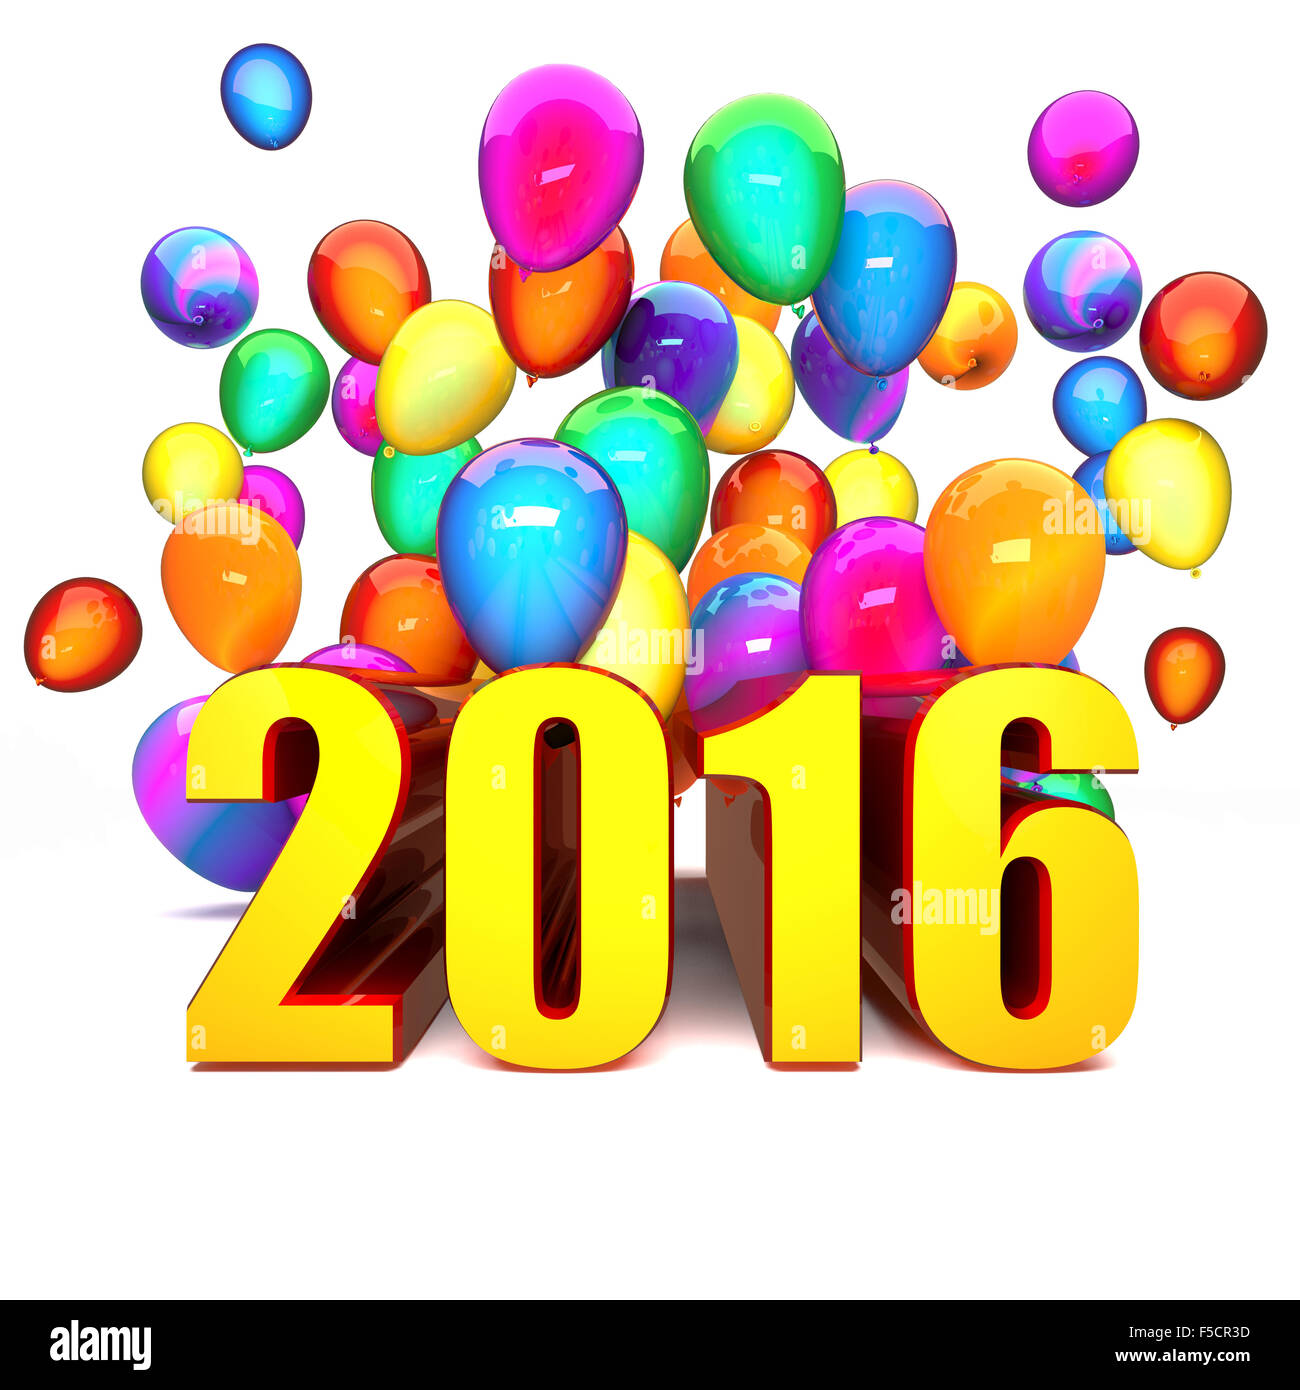 3d image of 2016 and balloon Stock Photo